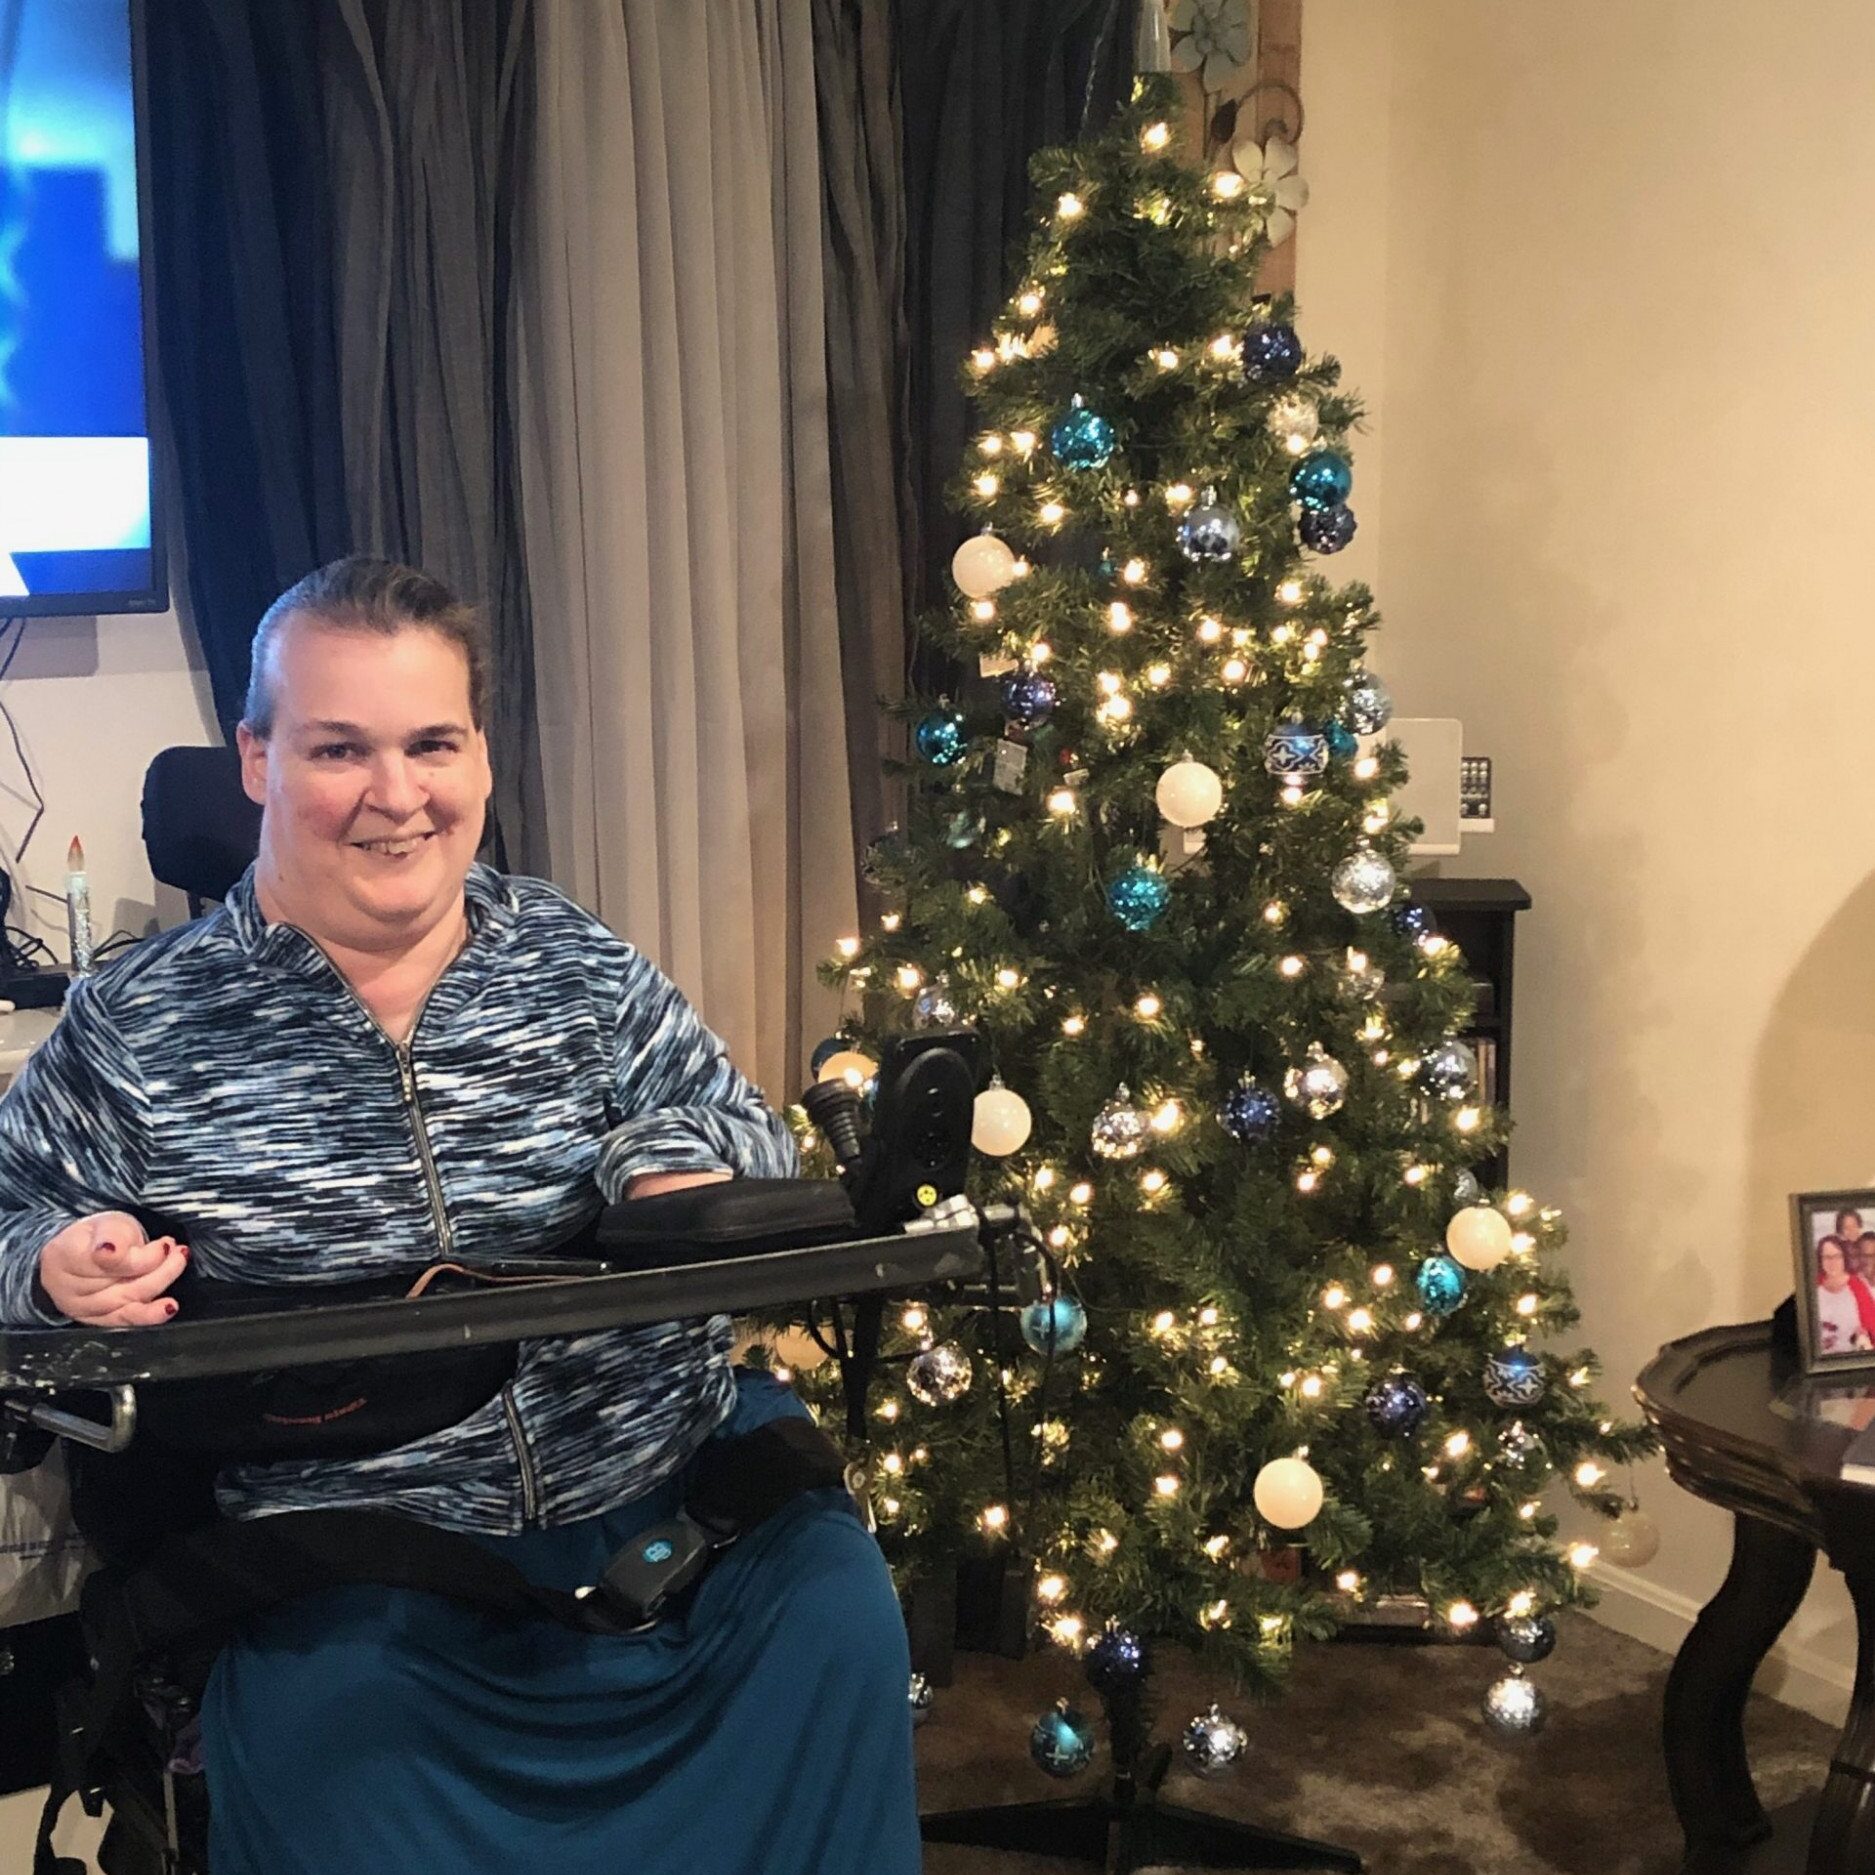 There's No Place Like Home. Happiness happened for Debbie when her dream of having a place of her own came true. Debbie’s first Christmas tree in her new home sparkled almost as much as she did!